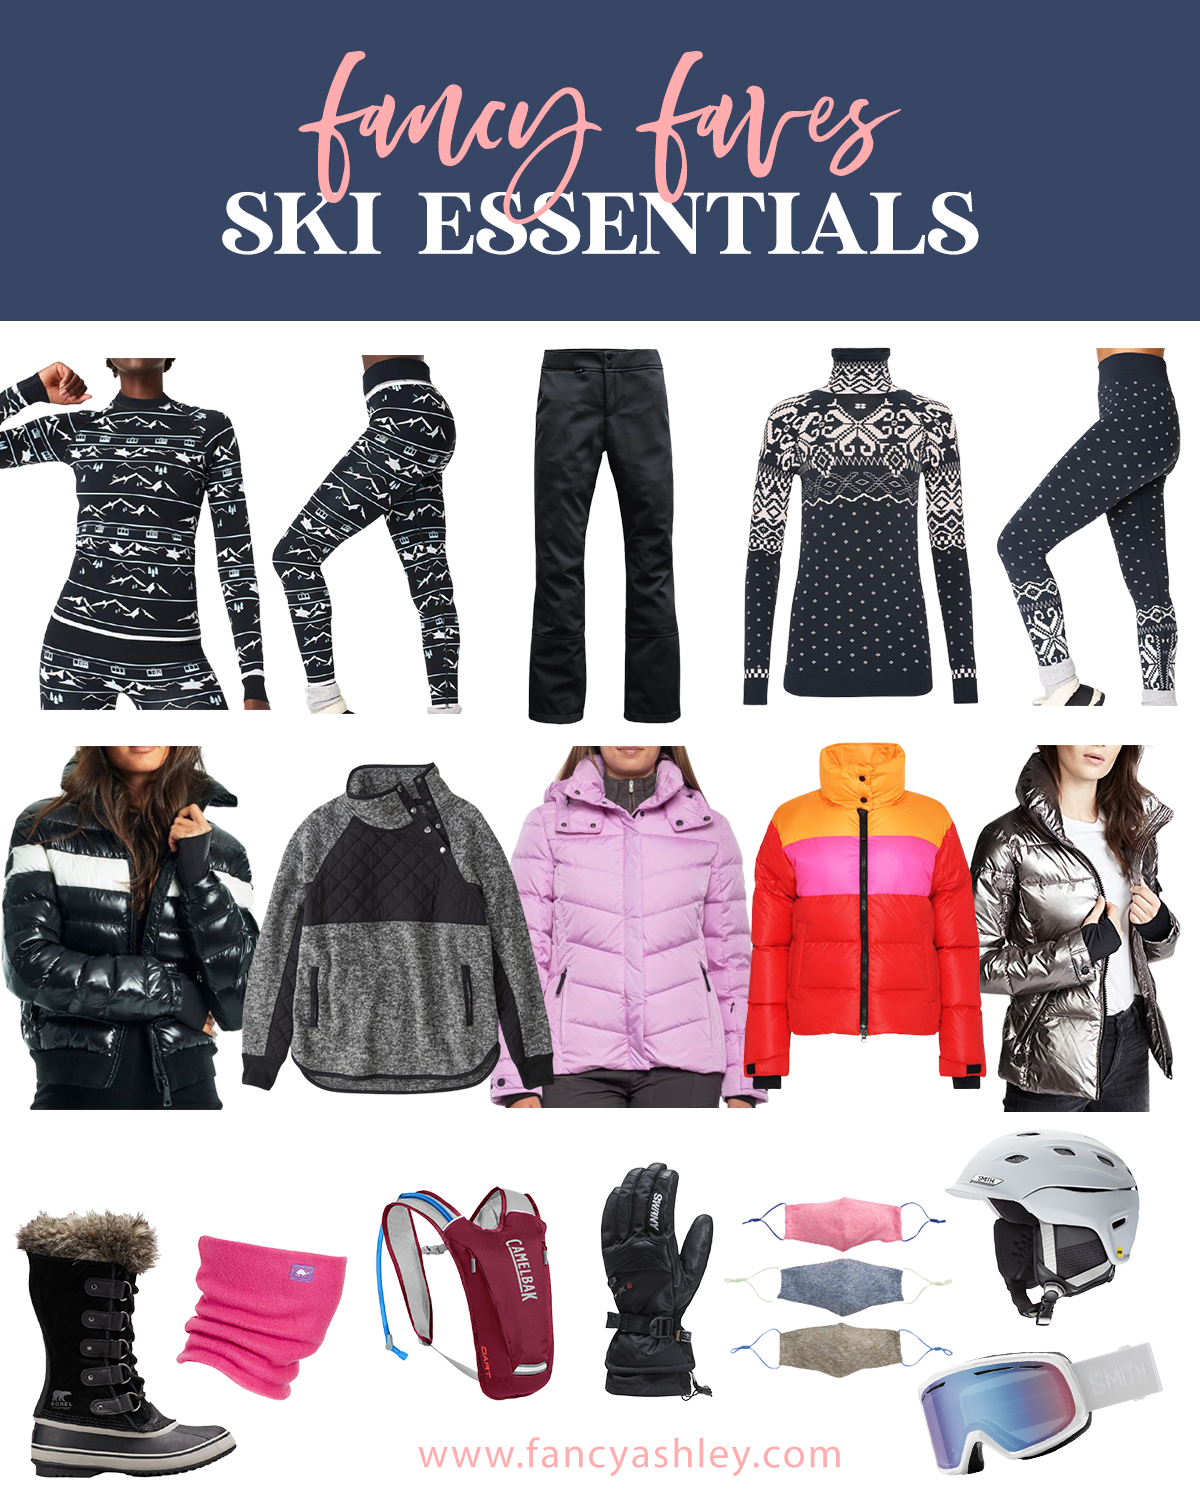 What to Pack for a Ski Trip by popular Houston lifestyle blog, Fancy Ashley: collage image of black and white print thermals, black snow pants, blue and white nordic turtleneck sweater, blue and white nordic print pants, black and white stripe puffer jacket, fleece pullover, light purple puffer jacket, red pink and oragne puffer jacket, silver ski jacket, Sorel fur trimmed boots, pink snood, Camelbak, black snow gloves, fabric face masks, white ski helmet, and white snow goggles. 